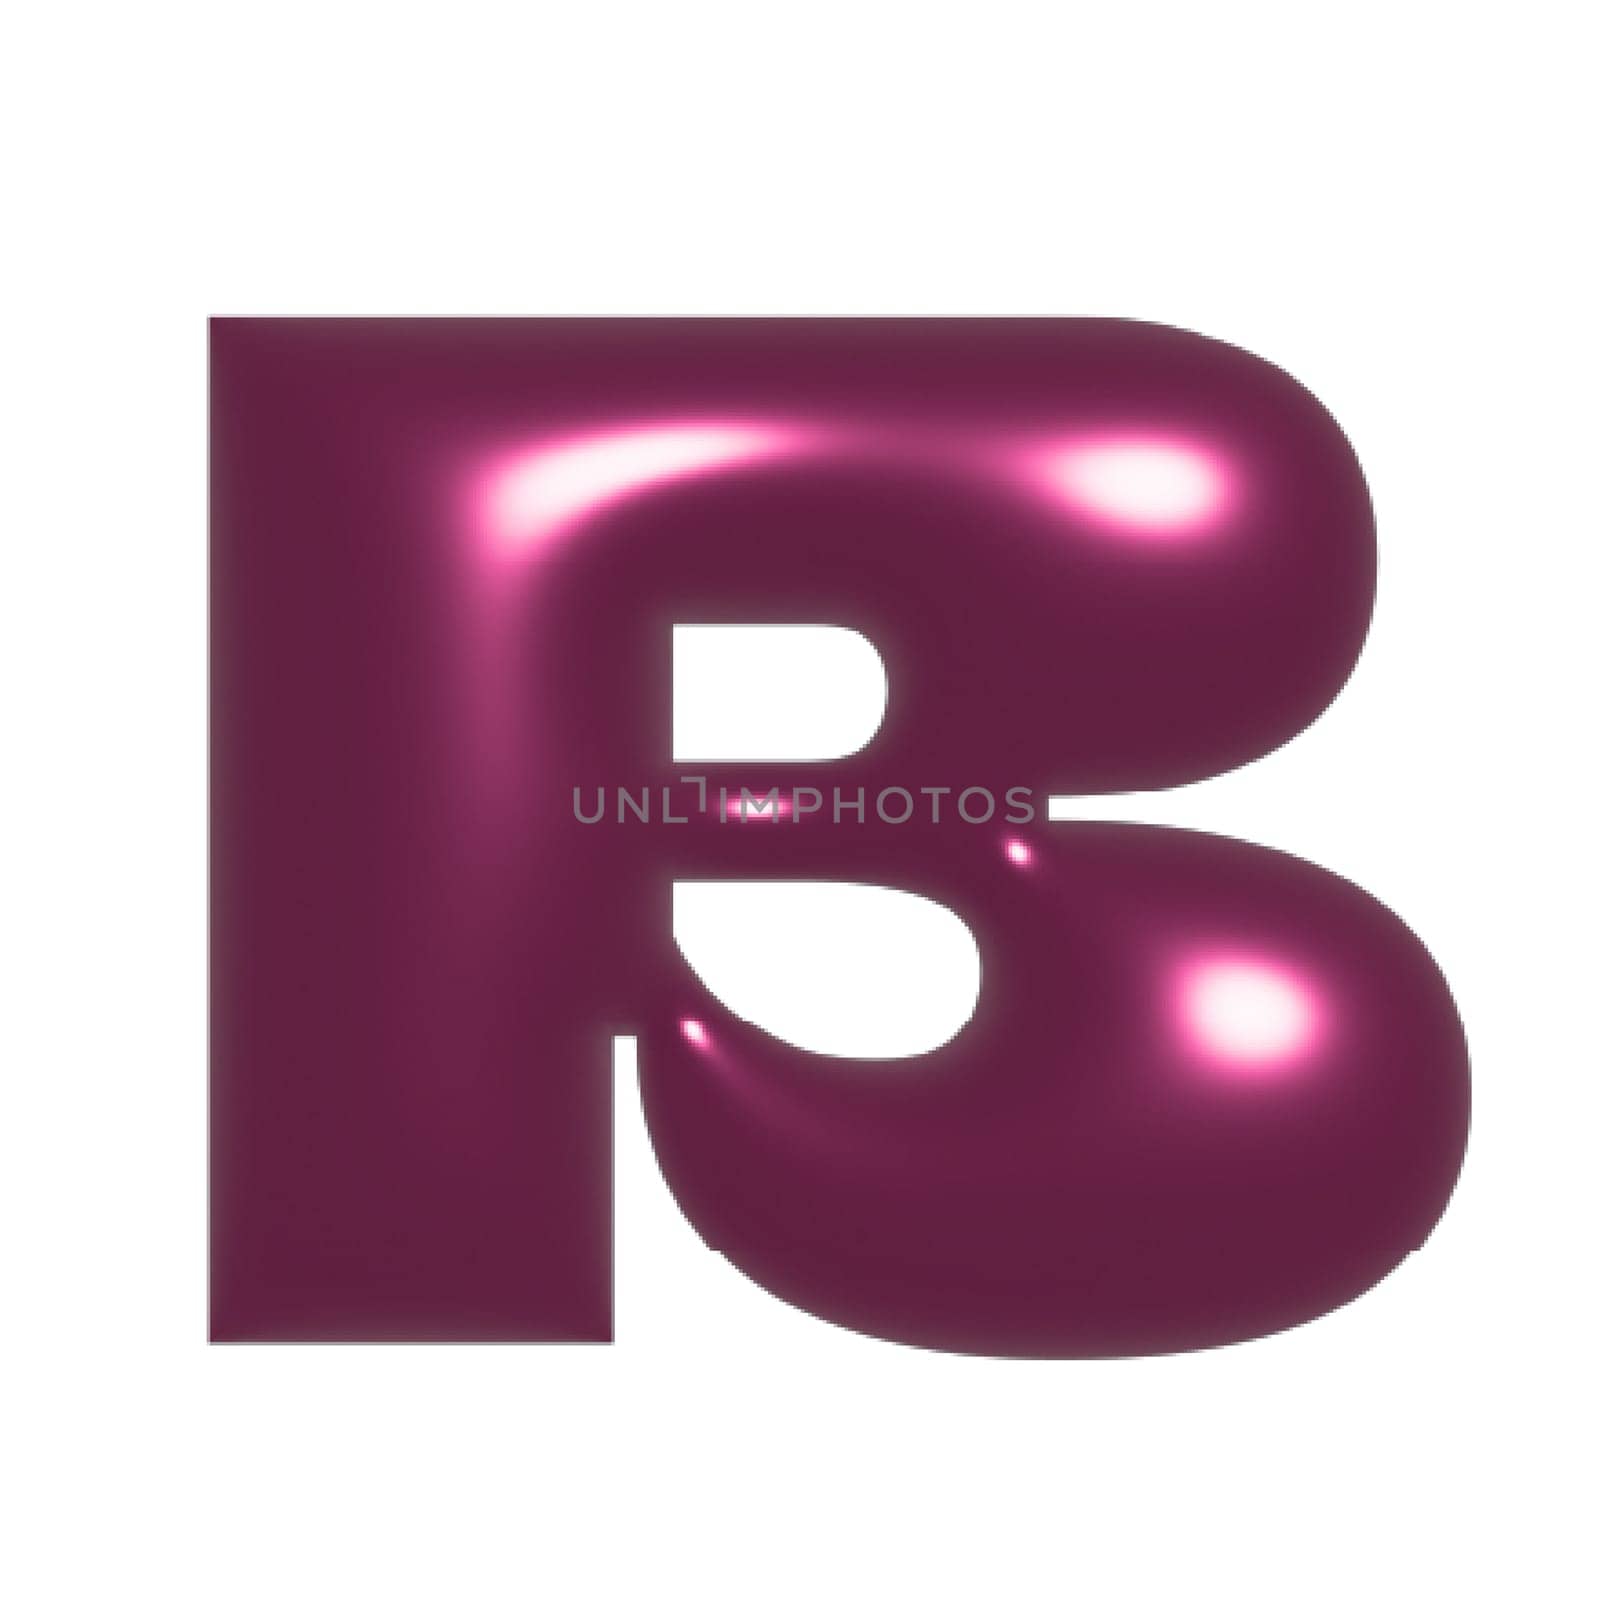 Red metal shiny reflective letter B 3D illustration by Dustick